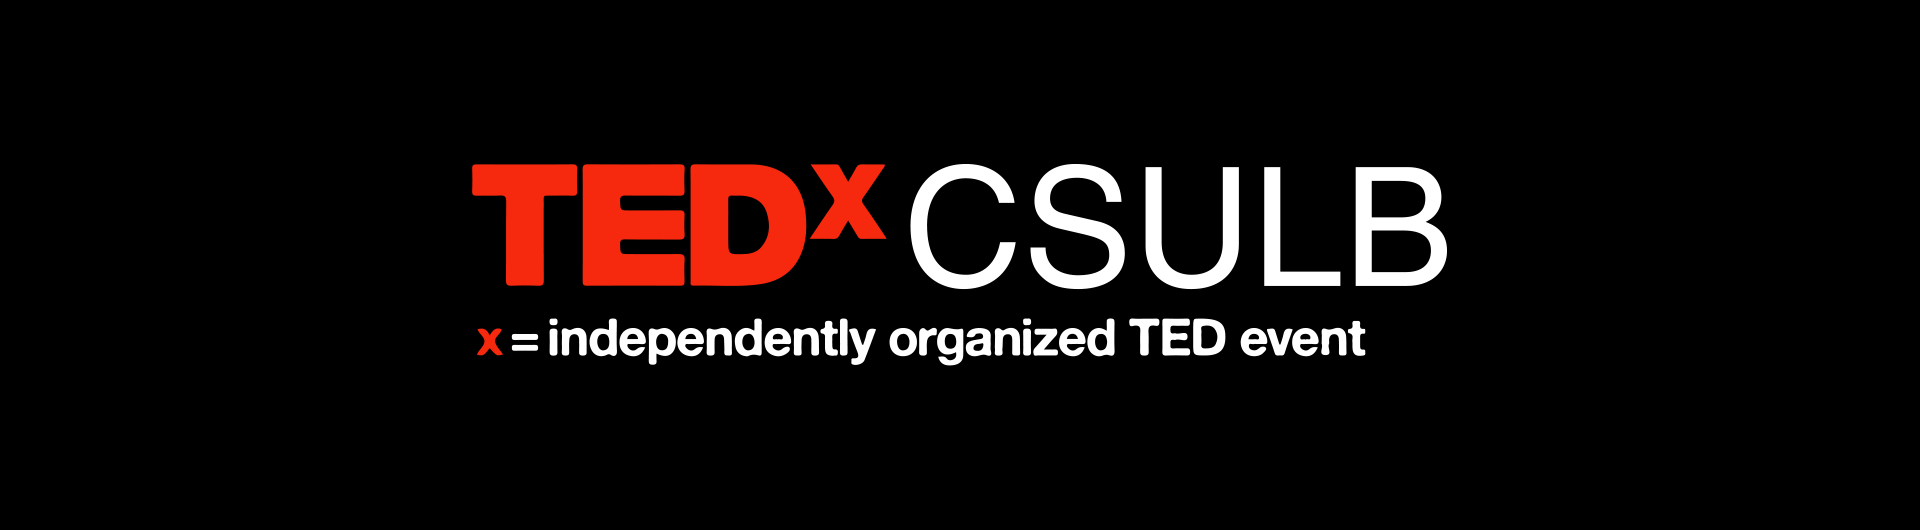 TEDxCSULB  independently organized TED event